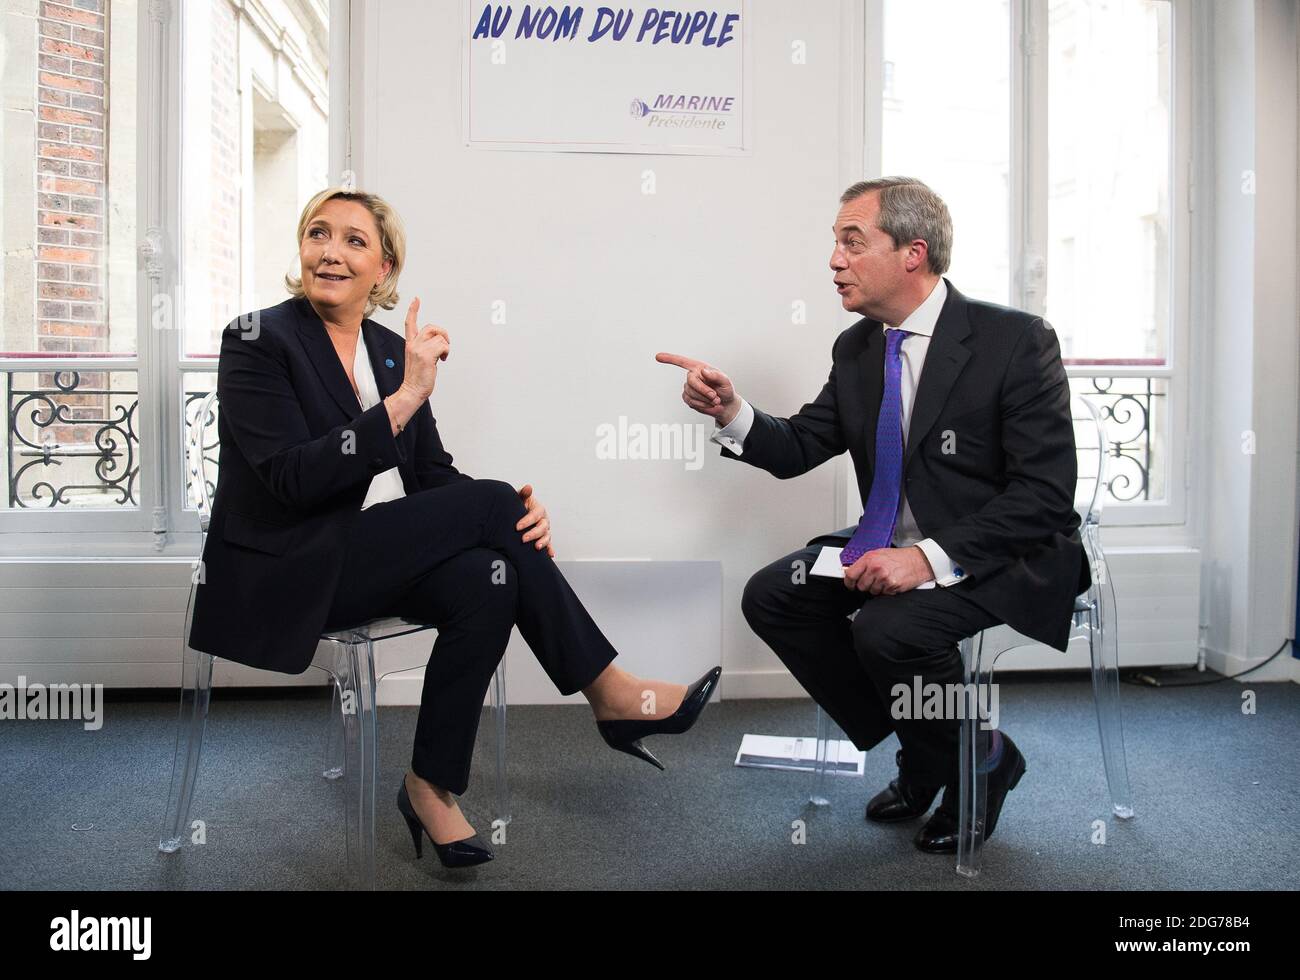 Exclusive - LBC presenter Nigel Farage interviews Marine Le Pen in Paris  for his weeknight national radio show in Paris on March 12, 2017. The full  interview will be broadcast in The Nigel Farage Show tonight (Wednesday)  from 7pm on LBC. Photo by Eliot ...